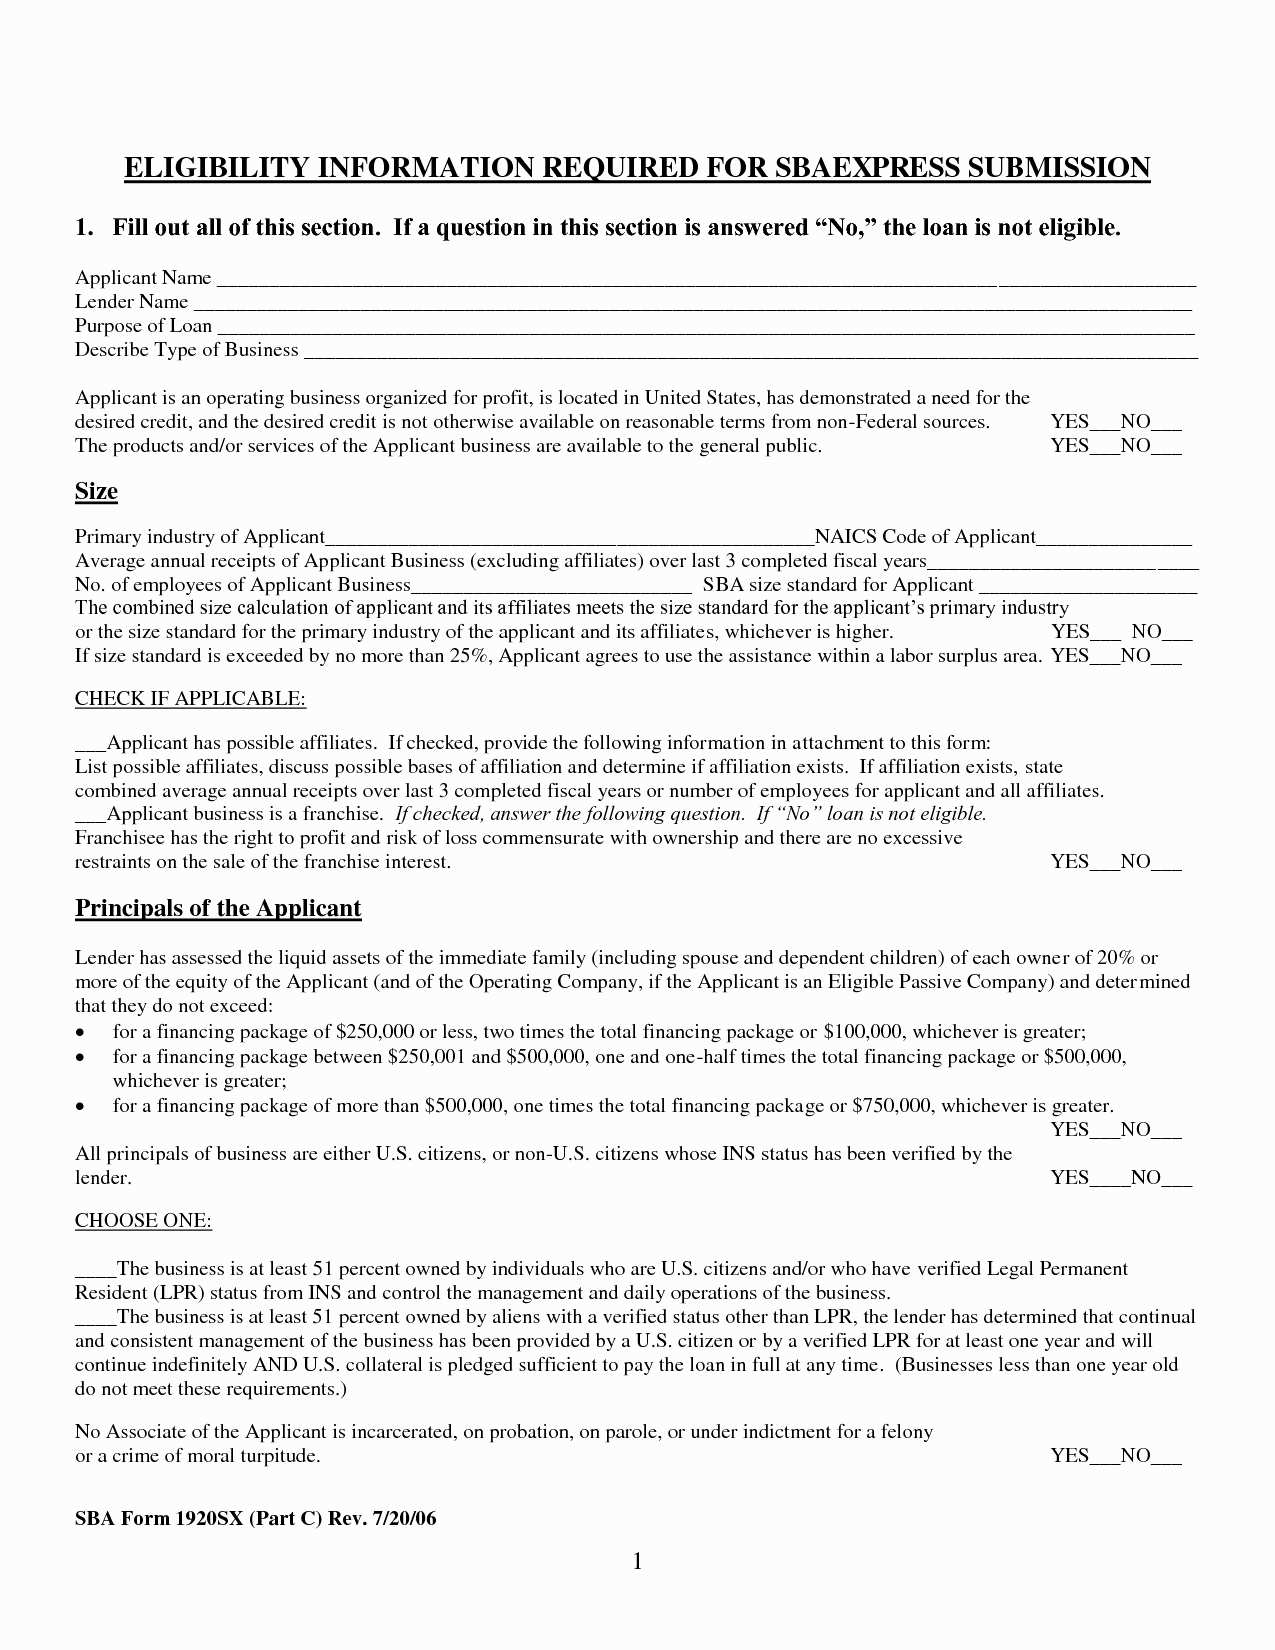 Corp To Corp Agreement Template S Corp Operating Agreement 99213 C Corporation Operating Agreement